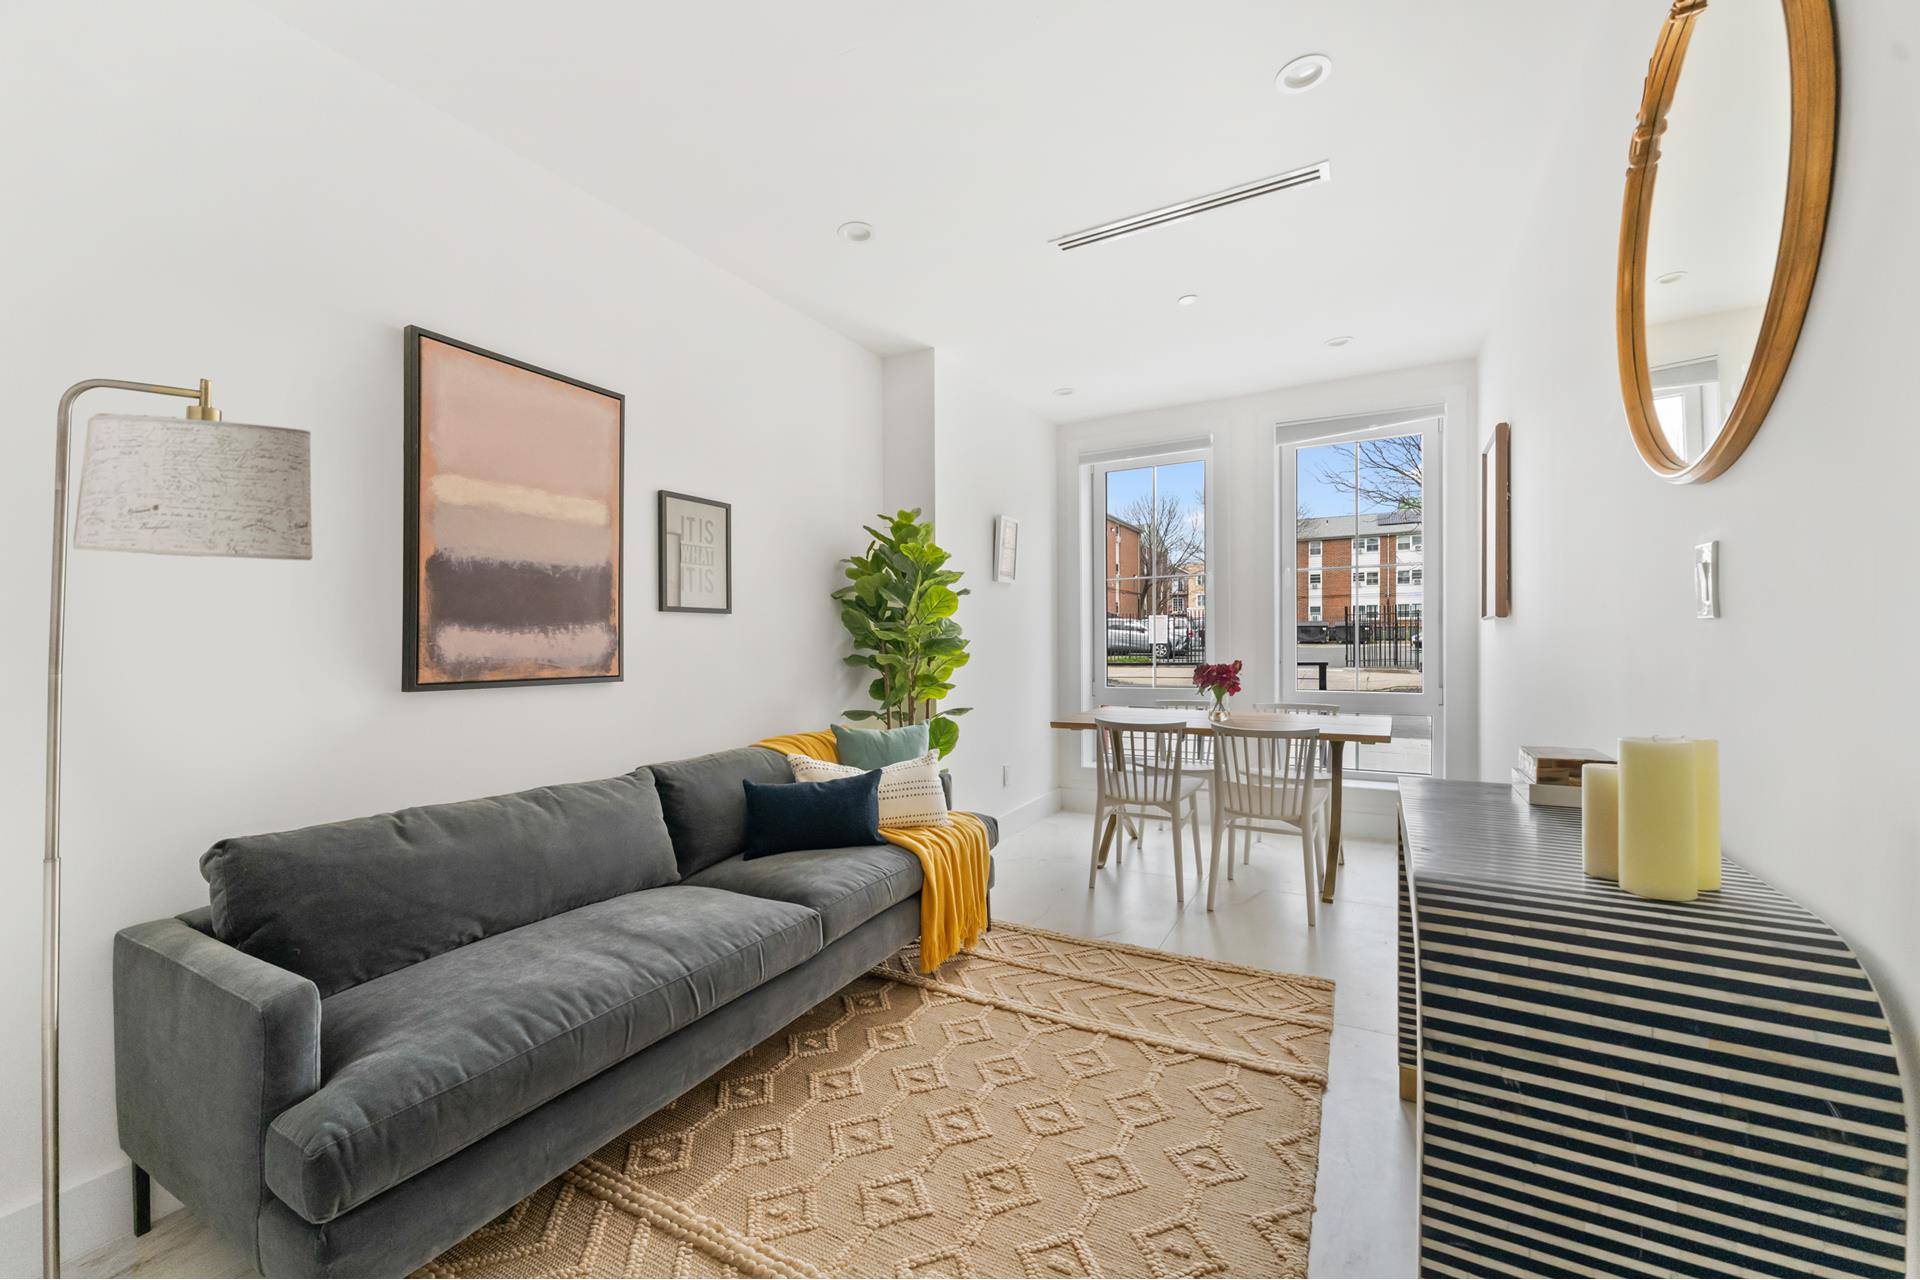 Welcome to 122 Palmetto Street in the exciting neighborhood of Bushwick, Brooklyn !